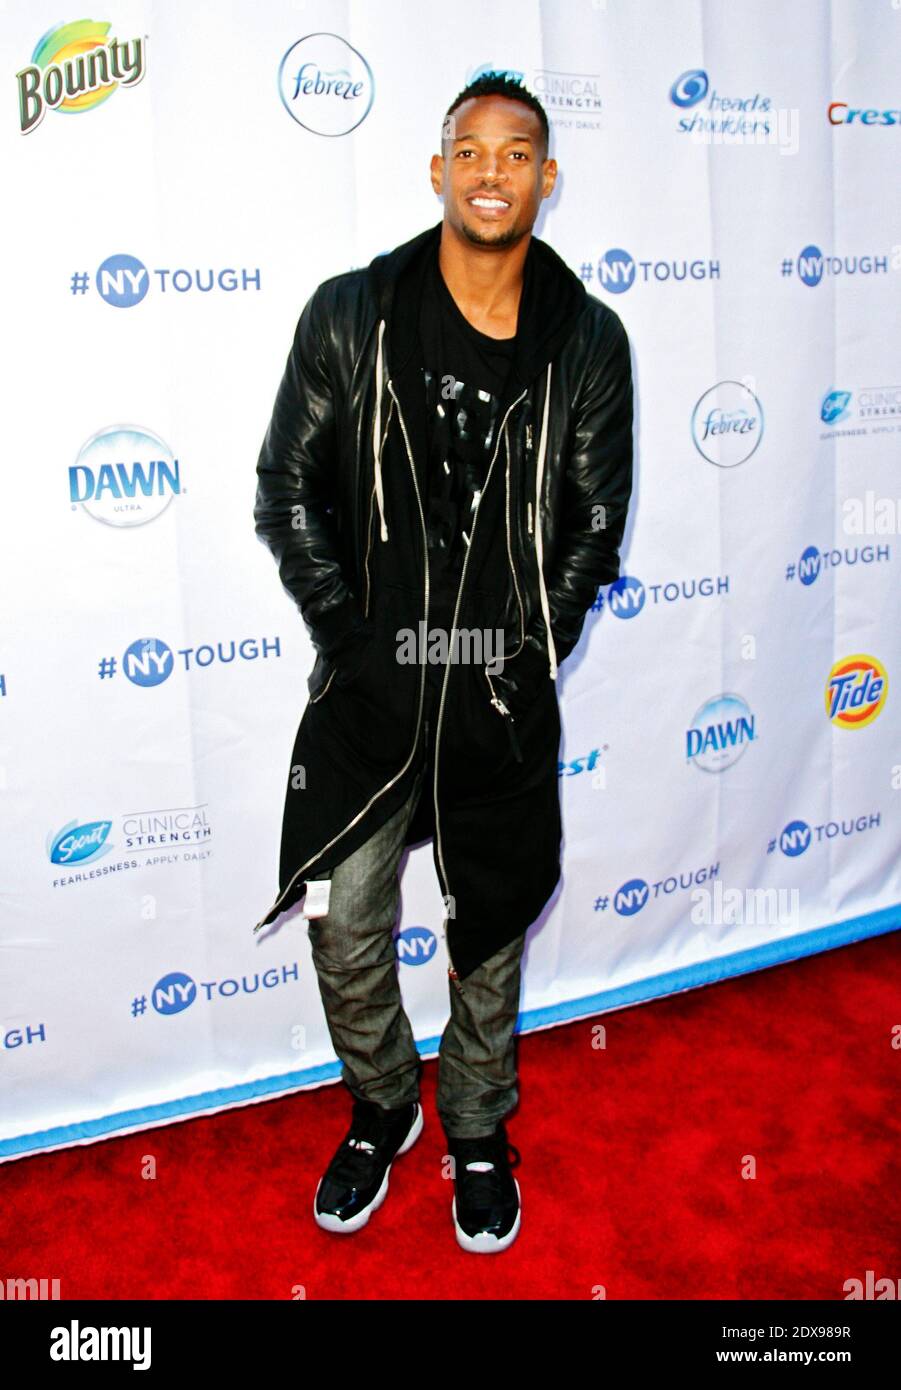 Marlon Wayans attends the Procter & Gamble NYTough Comedy Showcase at Caroline's on Broadway in New York City, NY, USA, on September 23, 2014. Photo by Donna Ward/ABACAPRESS.COM Stock Photo